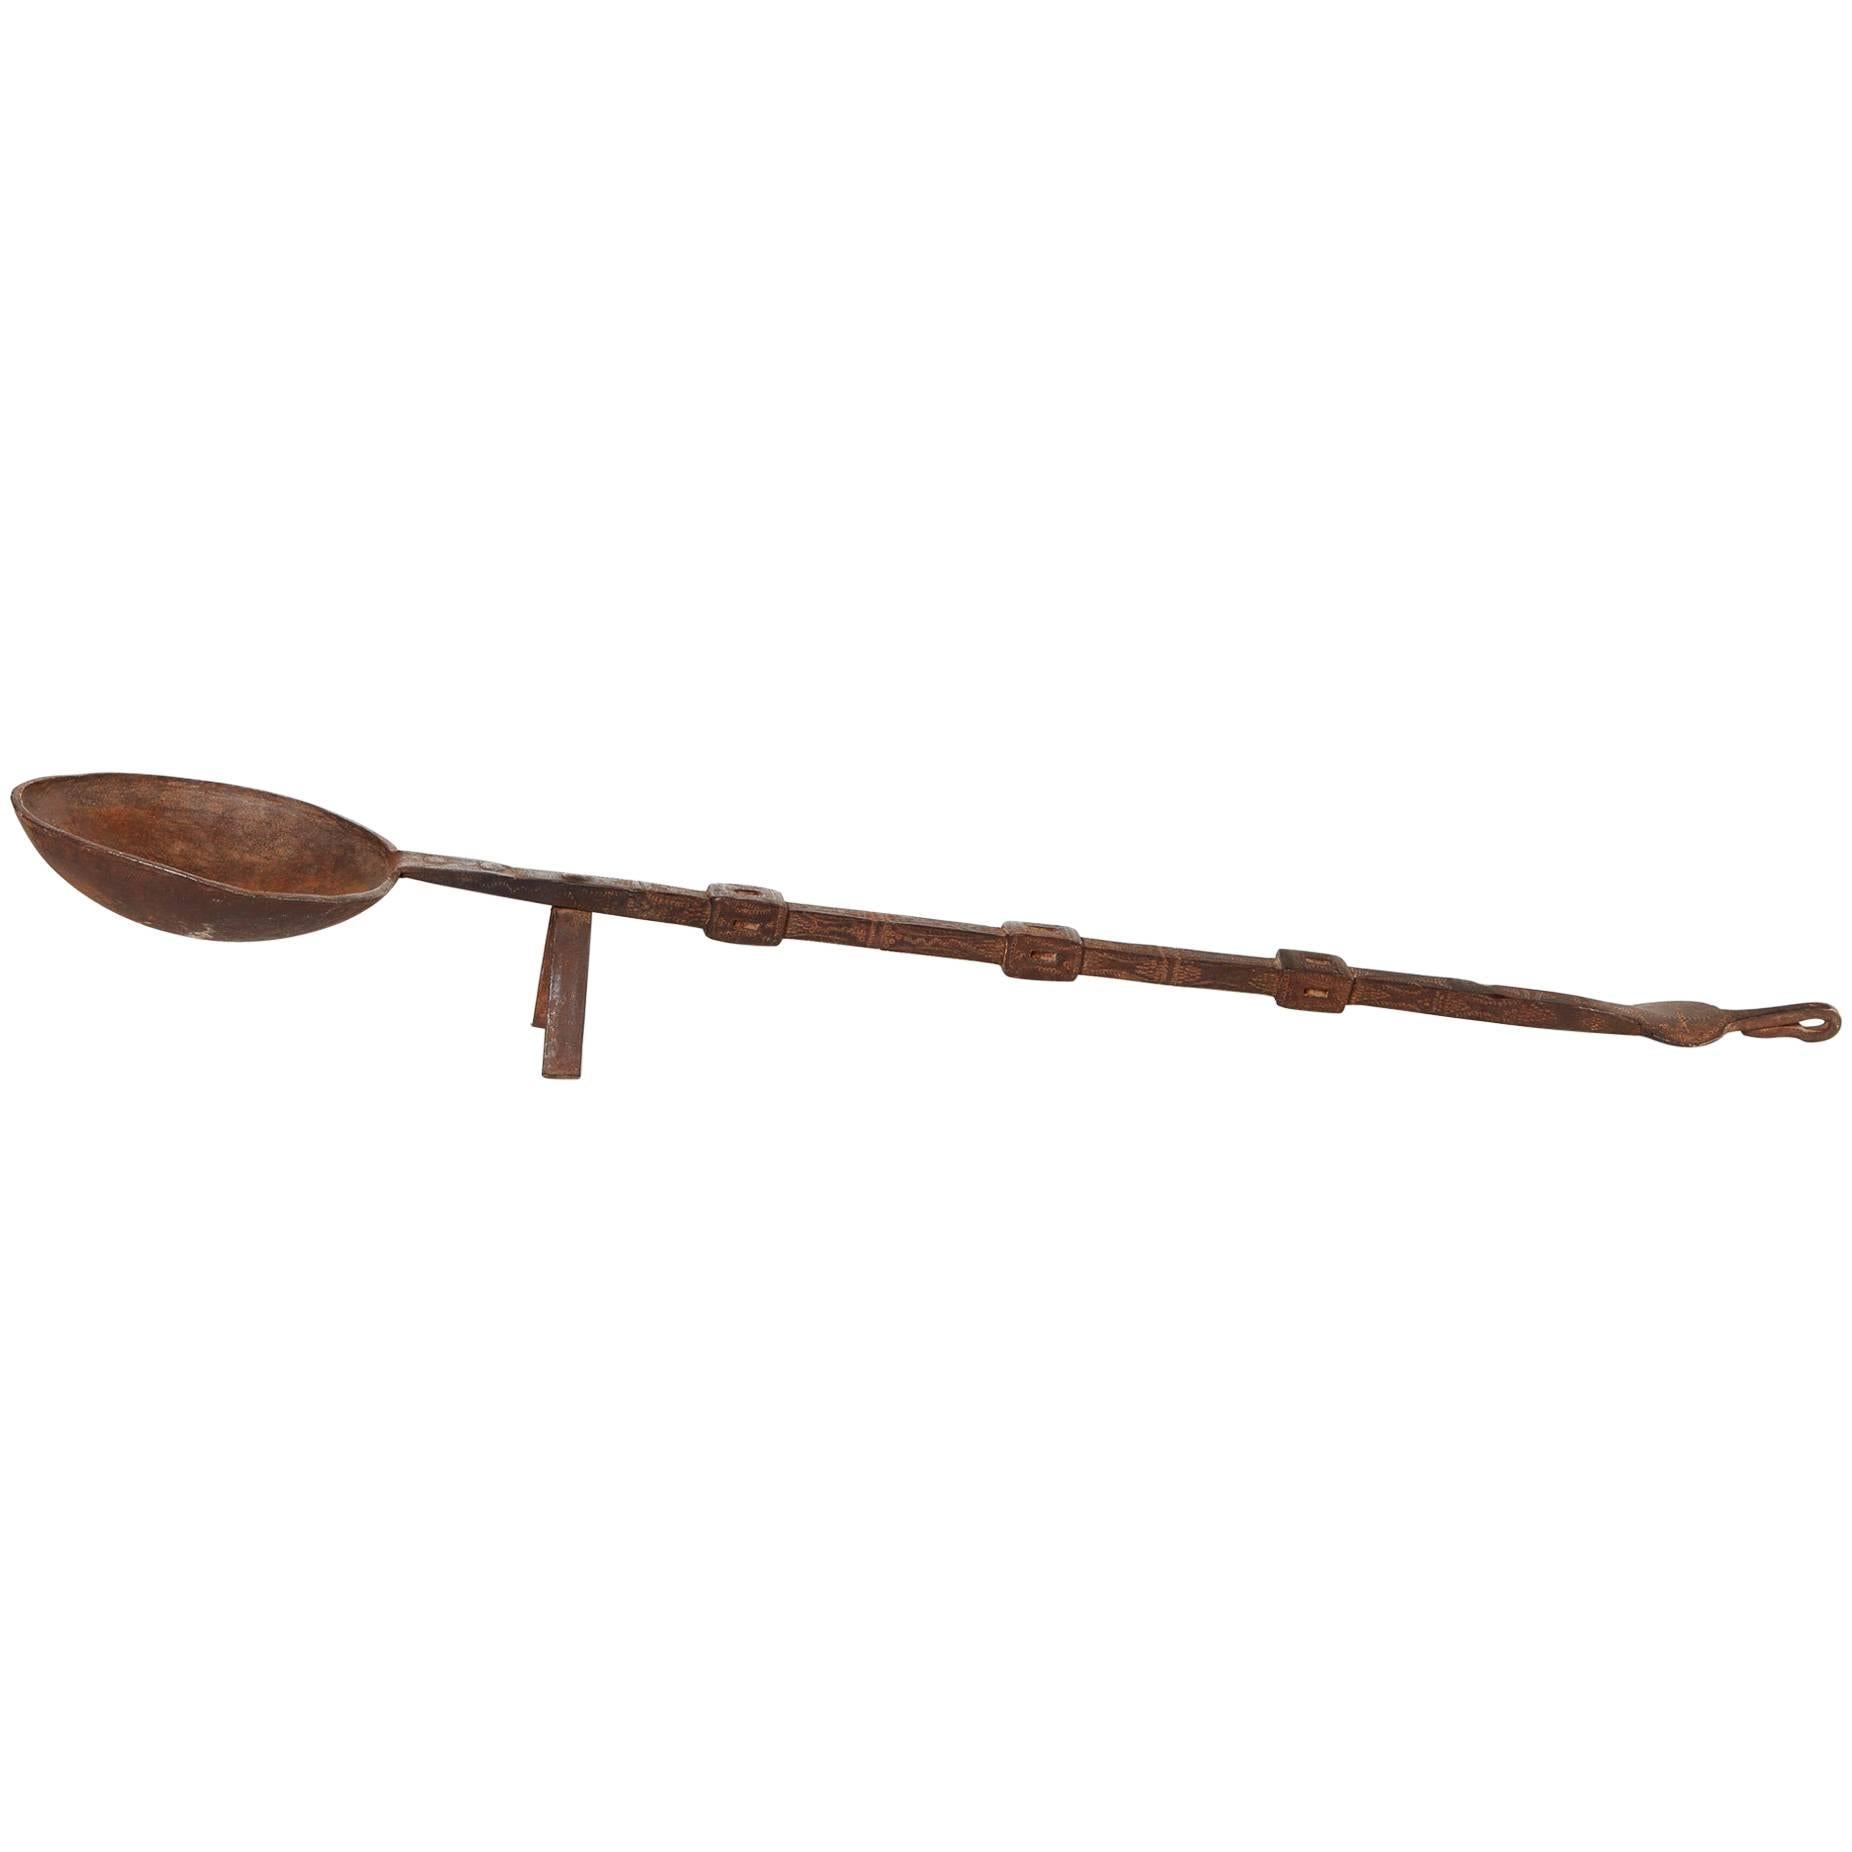 Early 20th Century Iron Cooking Utencil from India For Sale